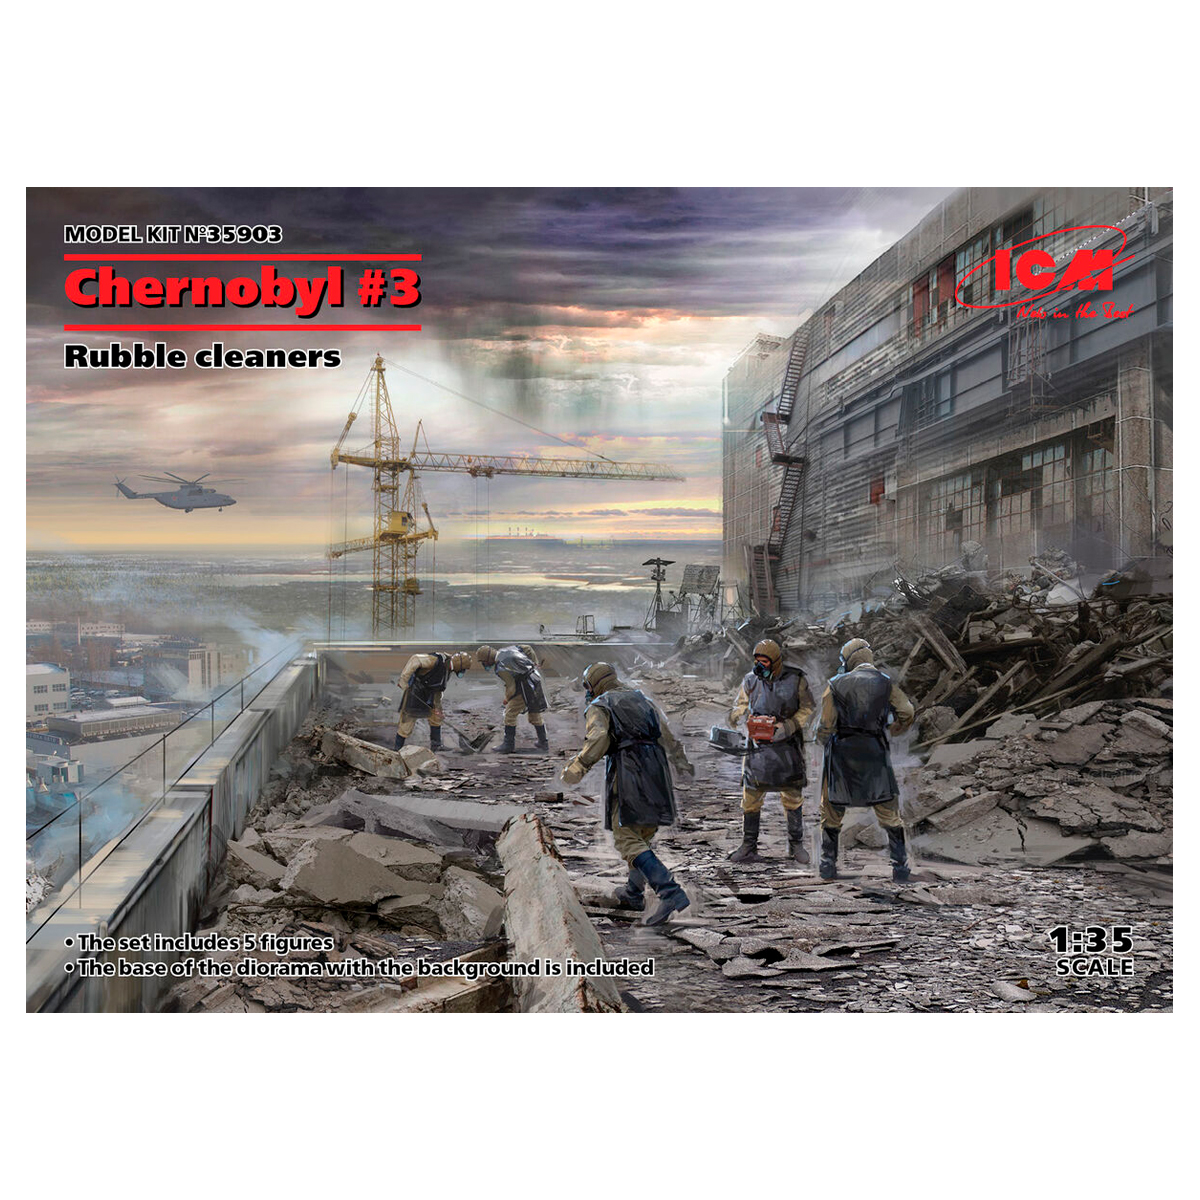 Chernobyl#3. Rubble cleaners (5 figures) 1/35